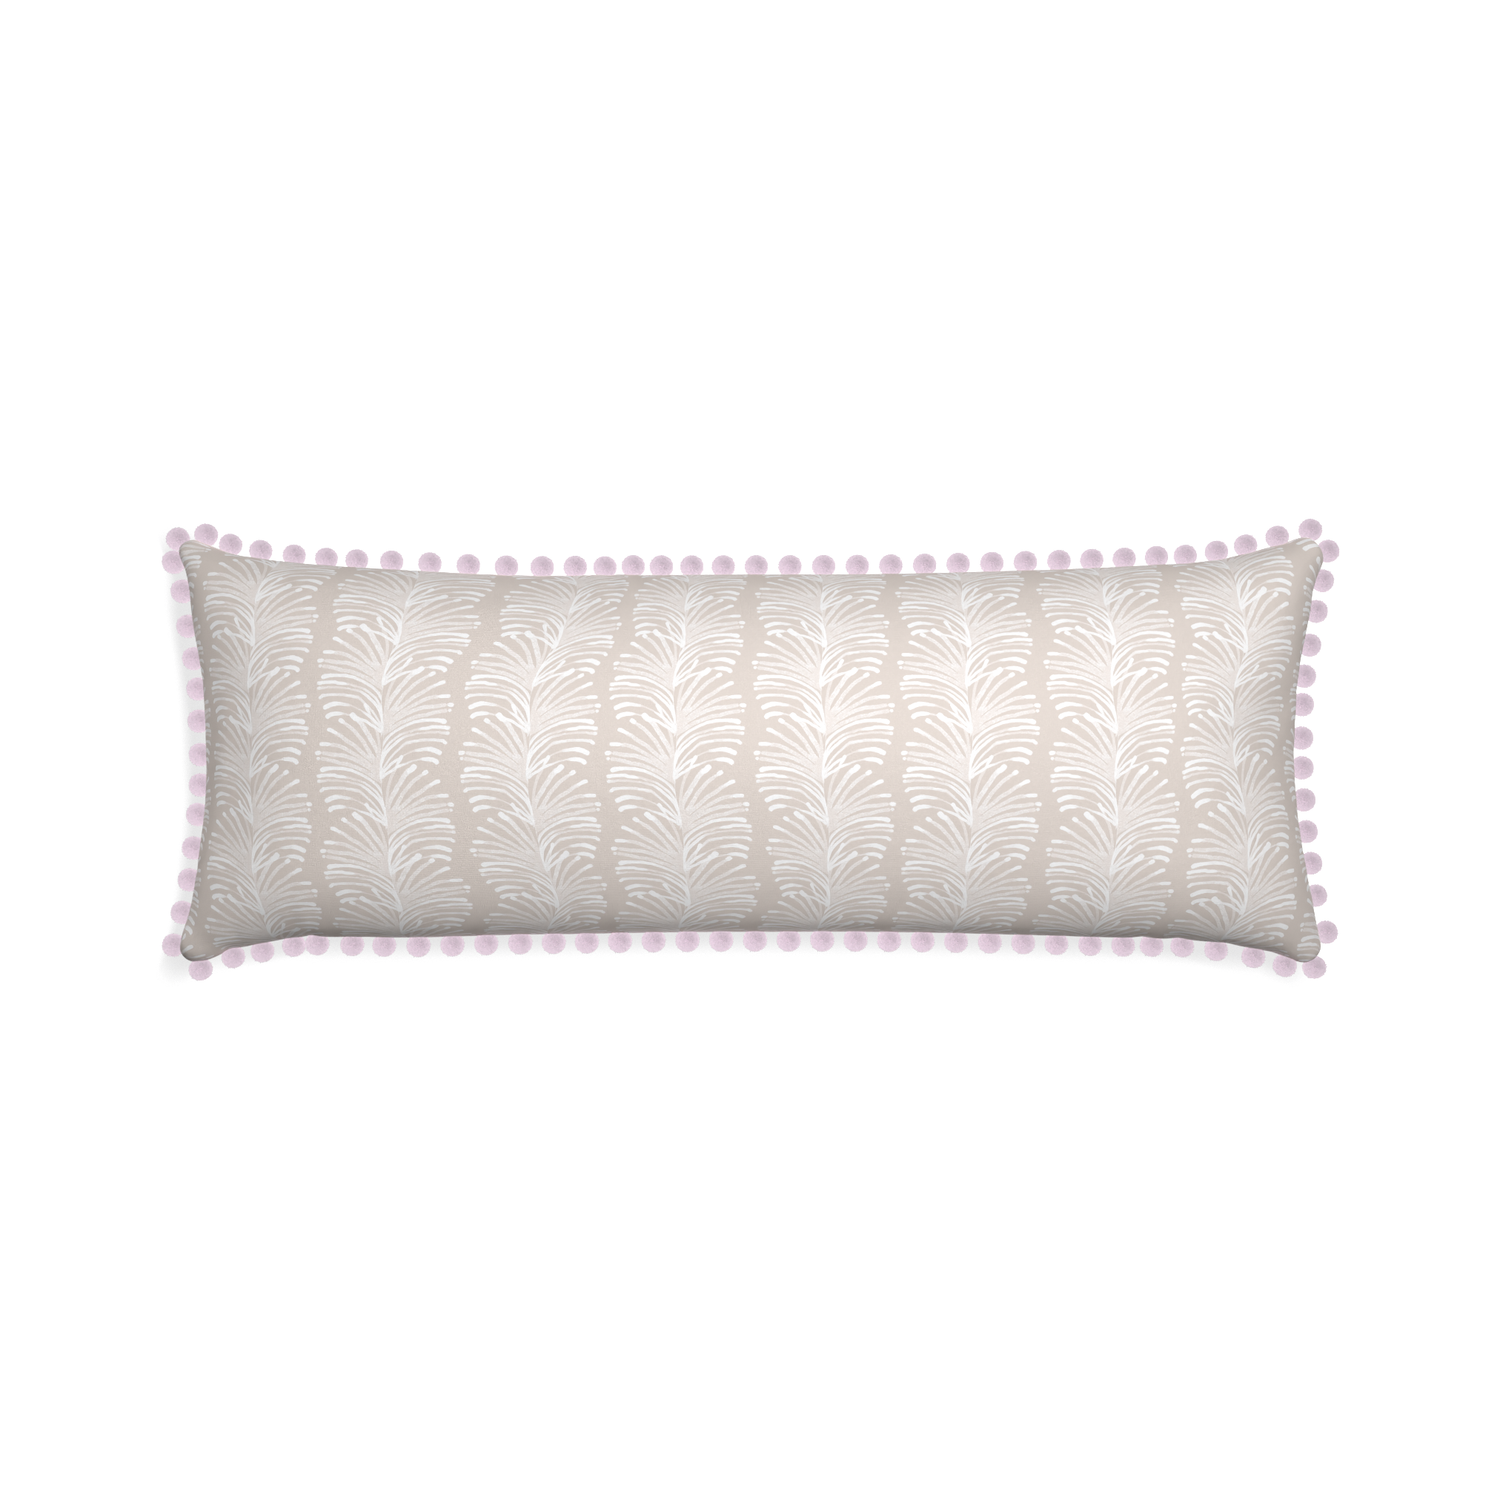 Xl-lumbar emma sand custom sand colored botanical stripepillow with l on white background